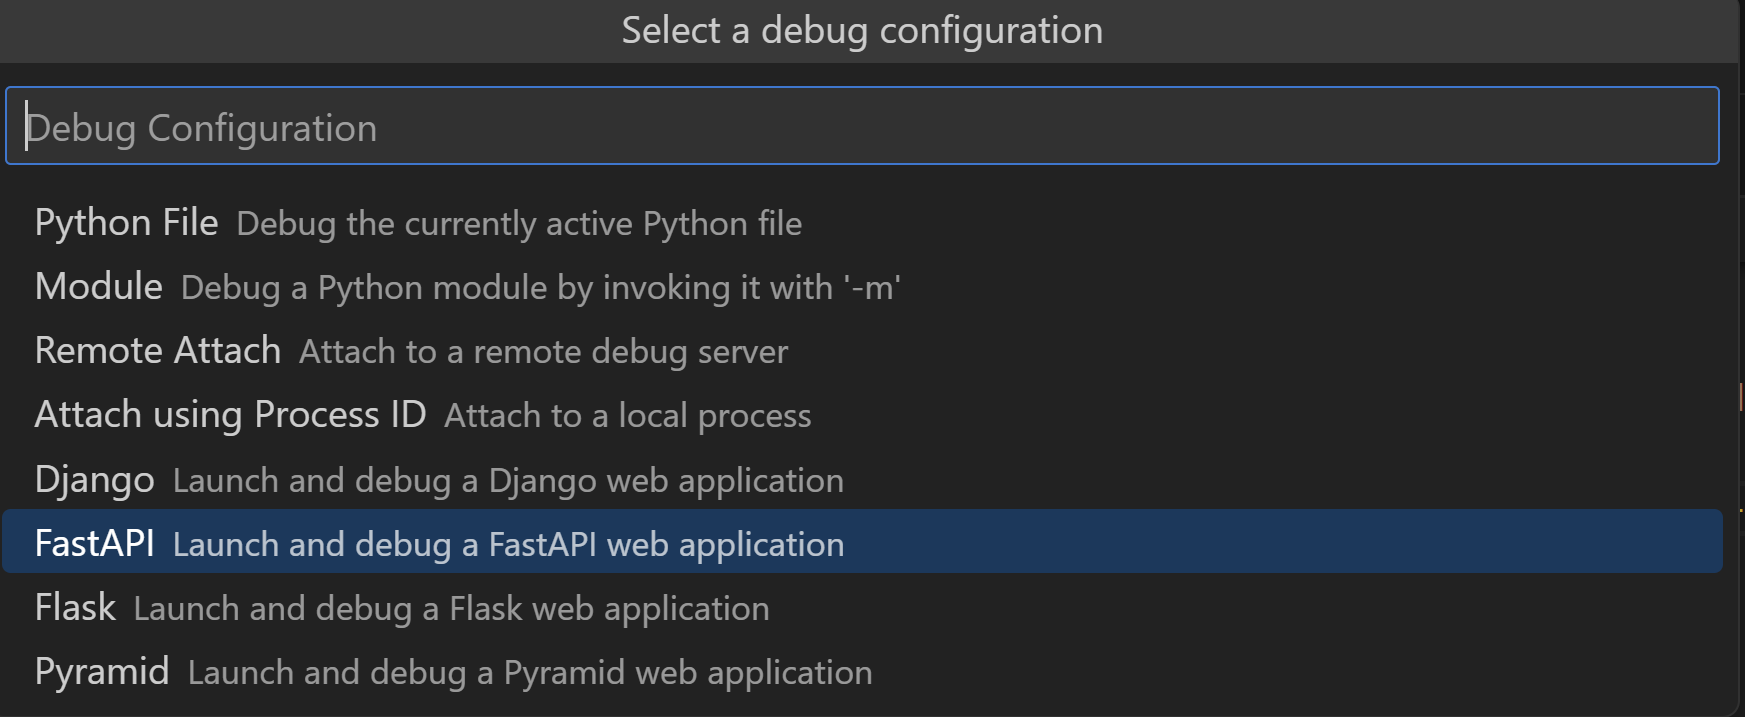 Dropdown with debugger configuration options, with FastAPI being highlighted